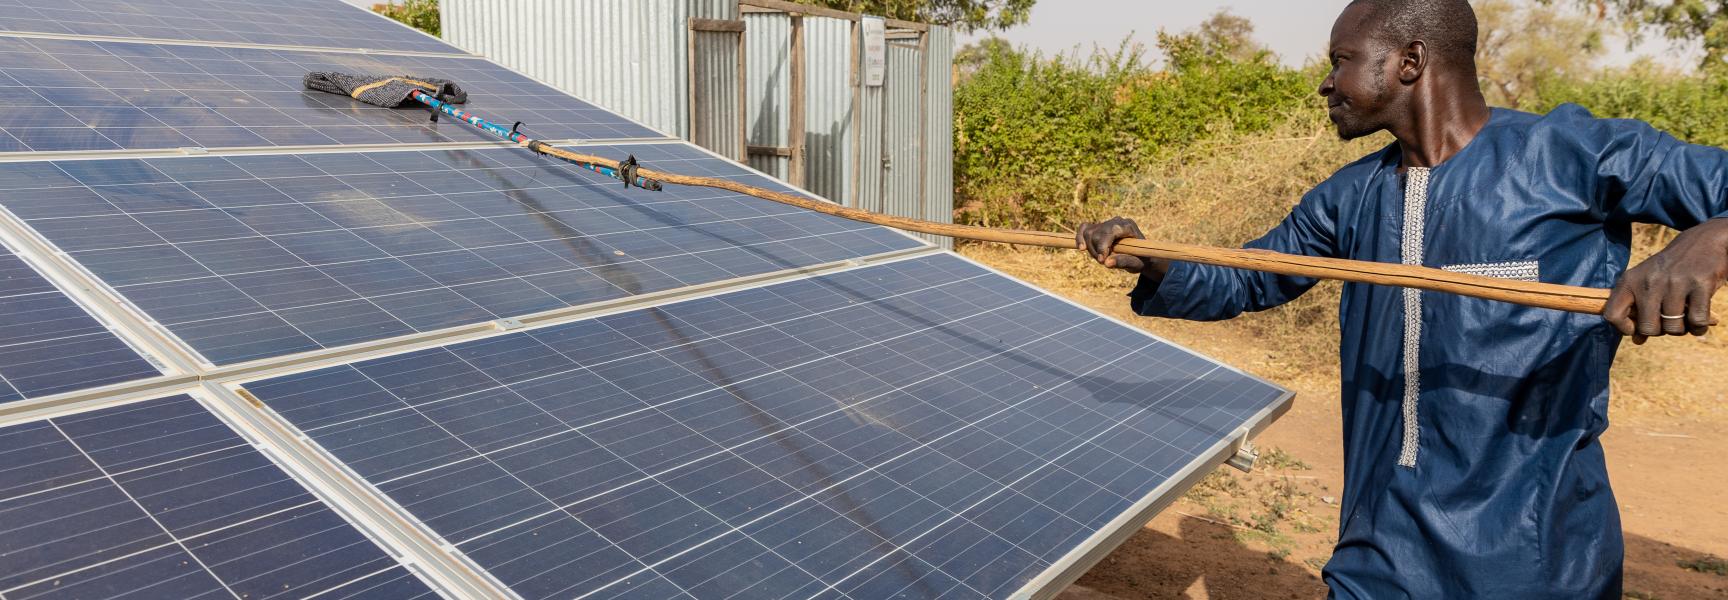 A man cleaning a solar panel in Mali